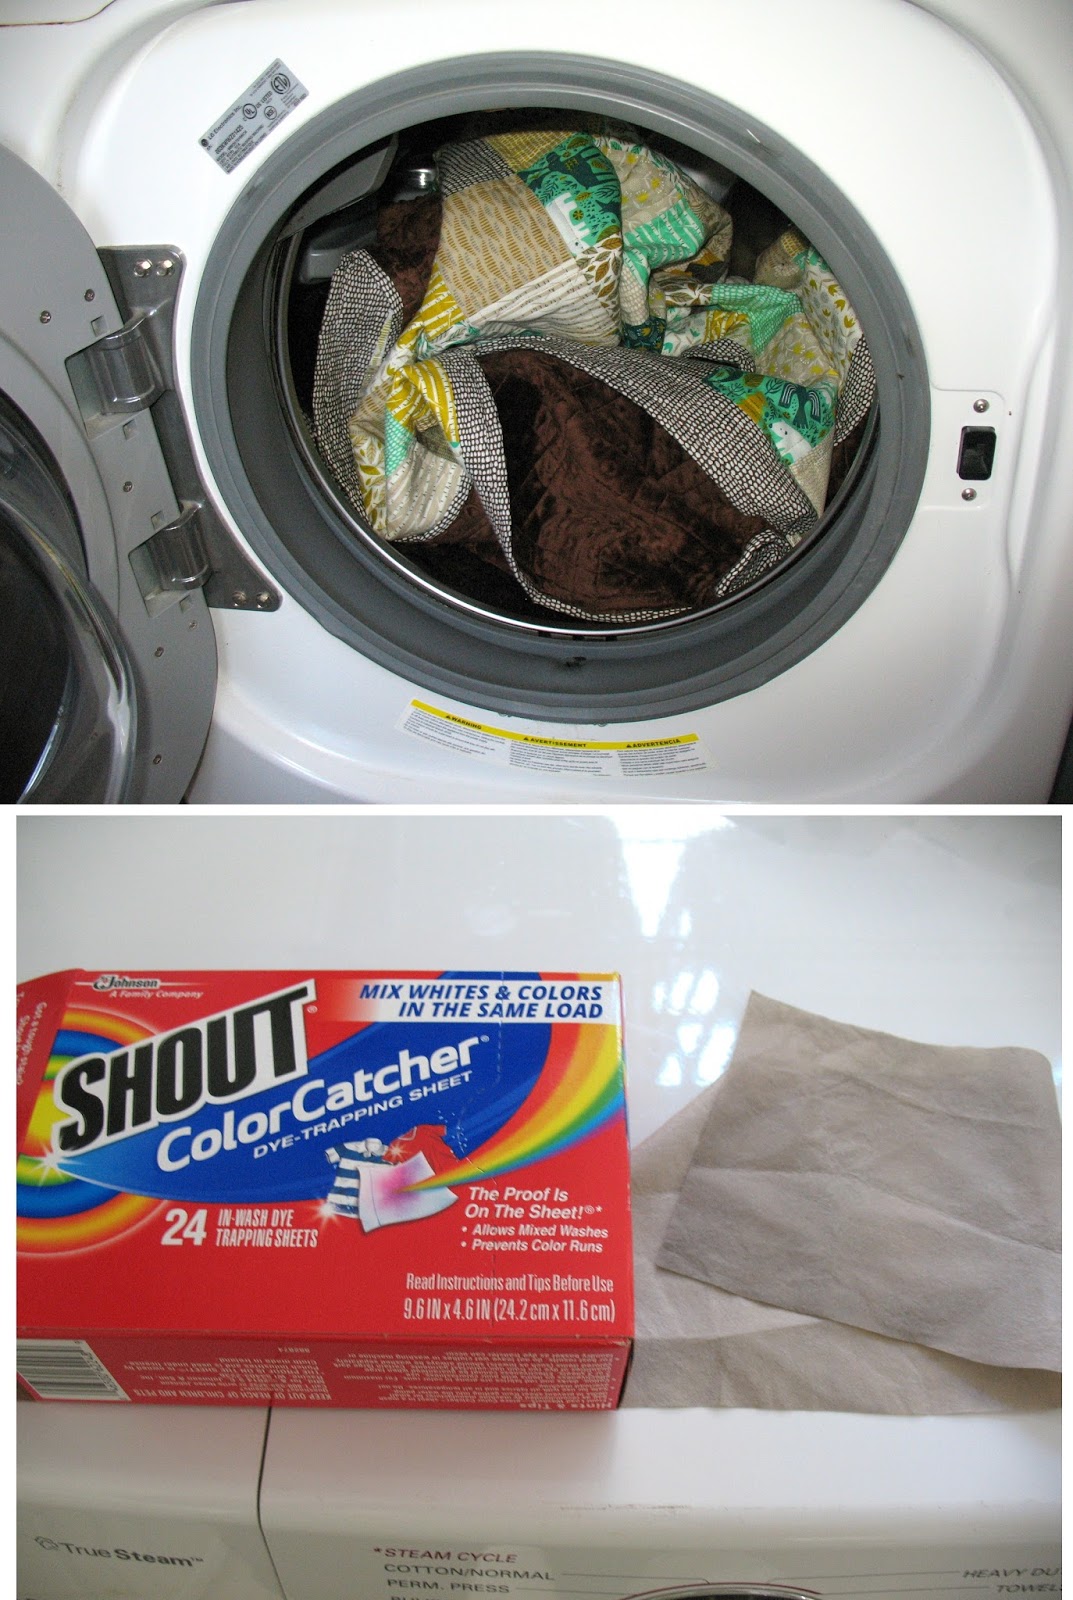  Shout Color Catcher Dye-Trapping, In-Wash Cloths - 24